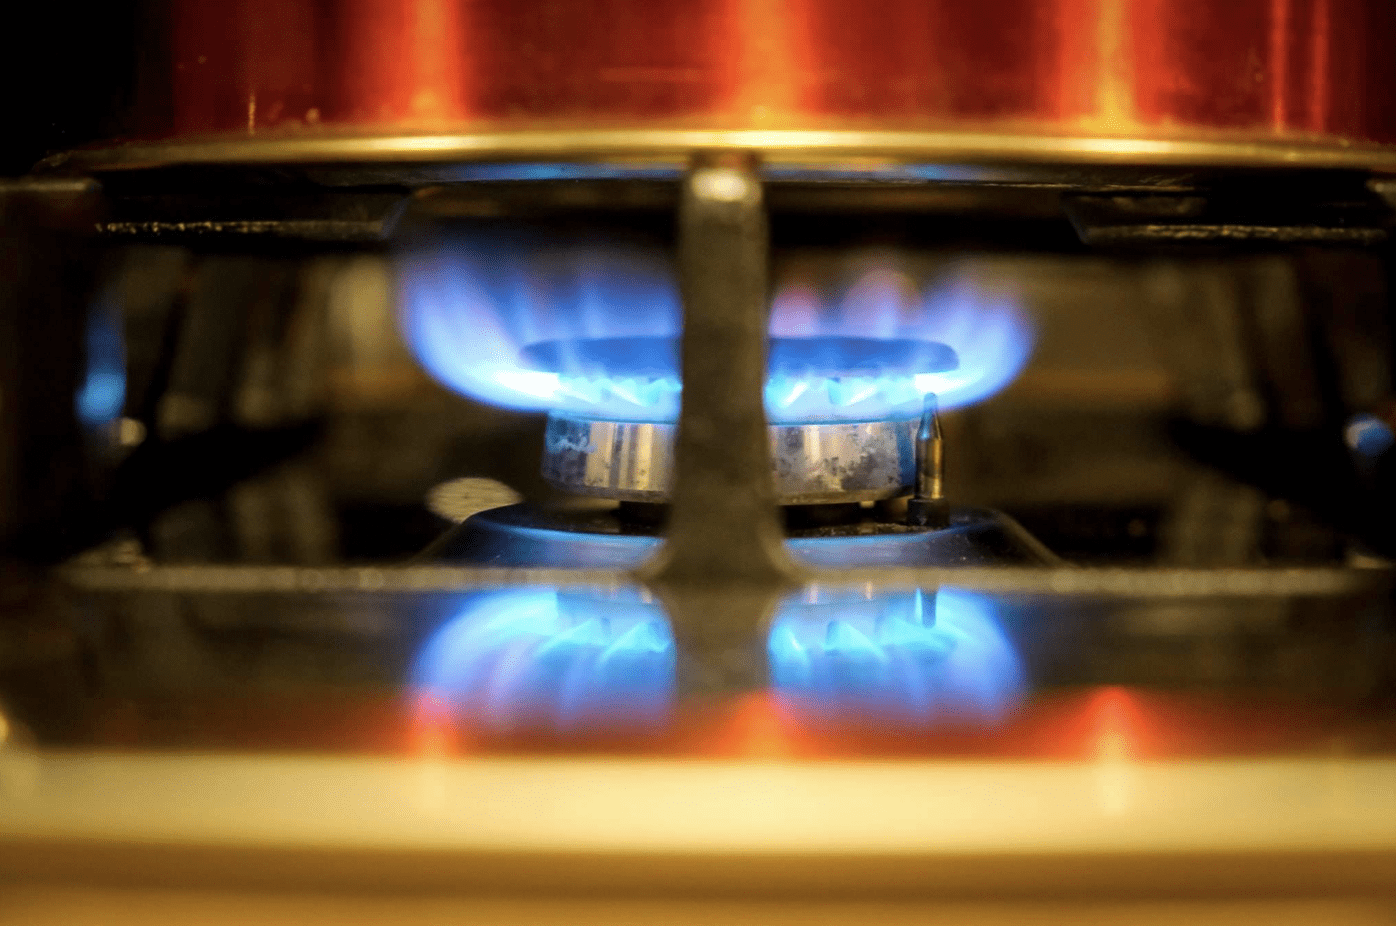 Lawsuit challenges New York’s ban on gas stoves